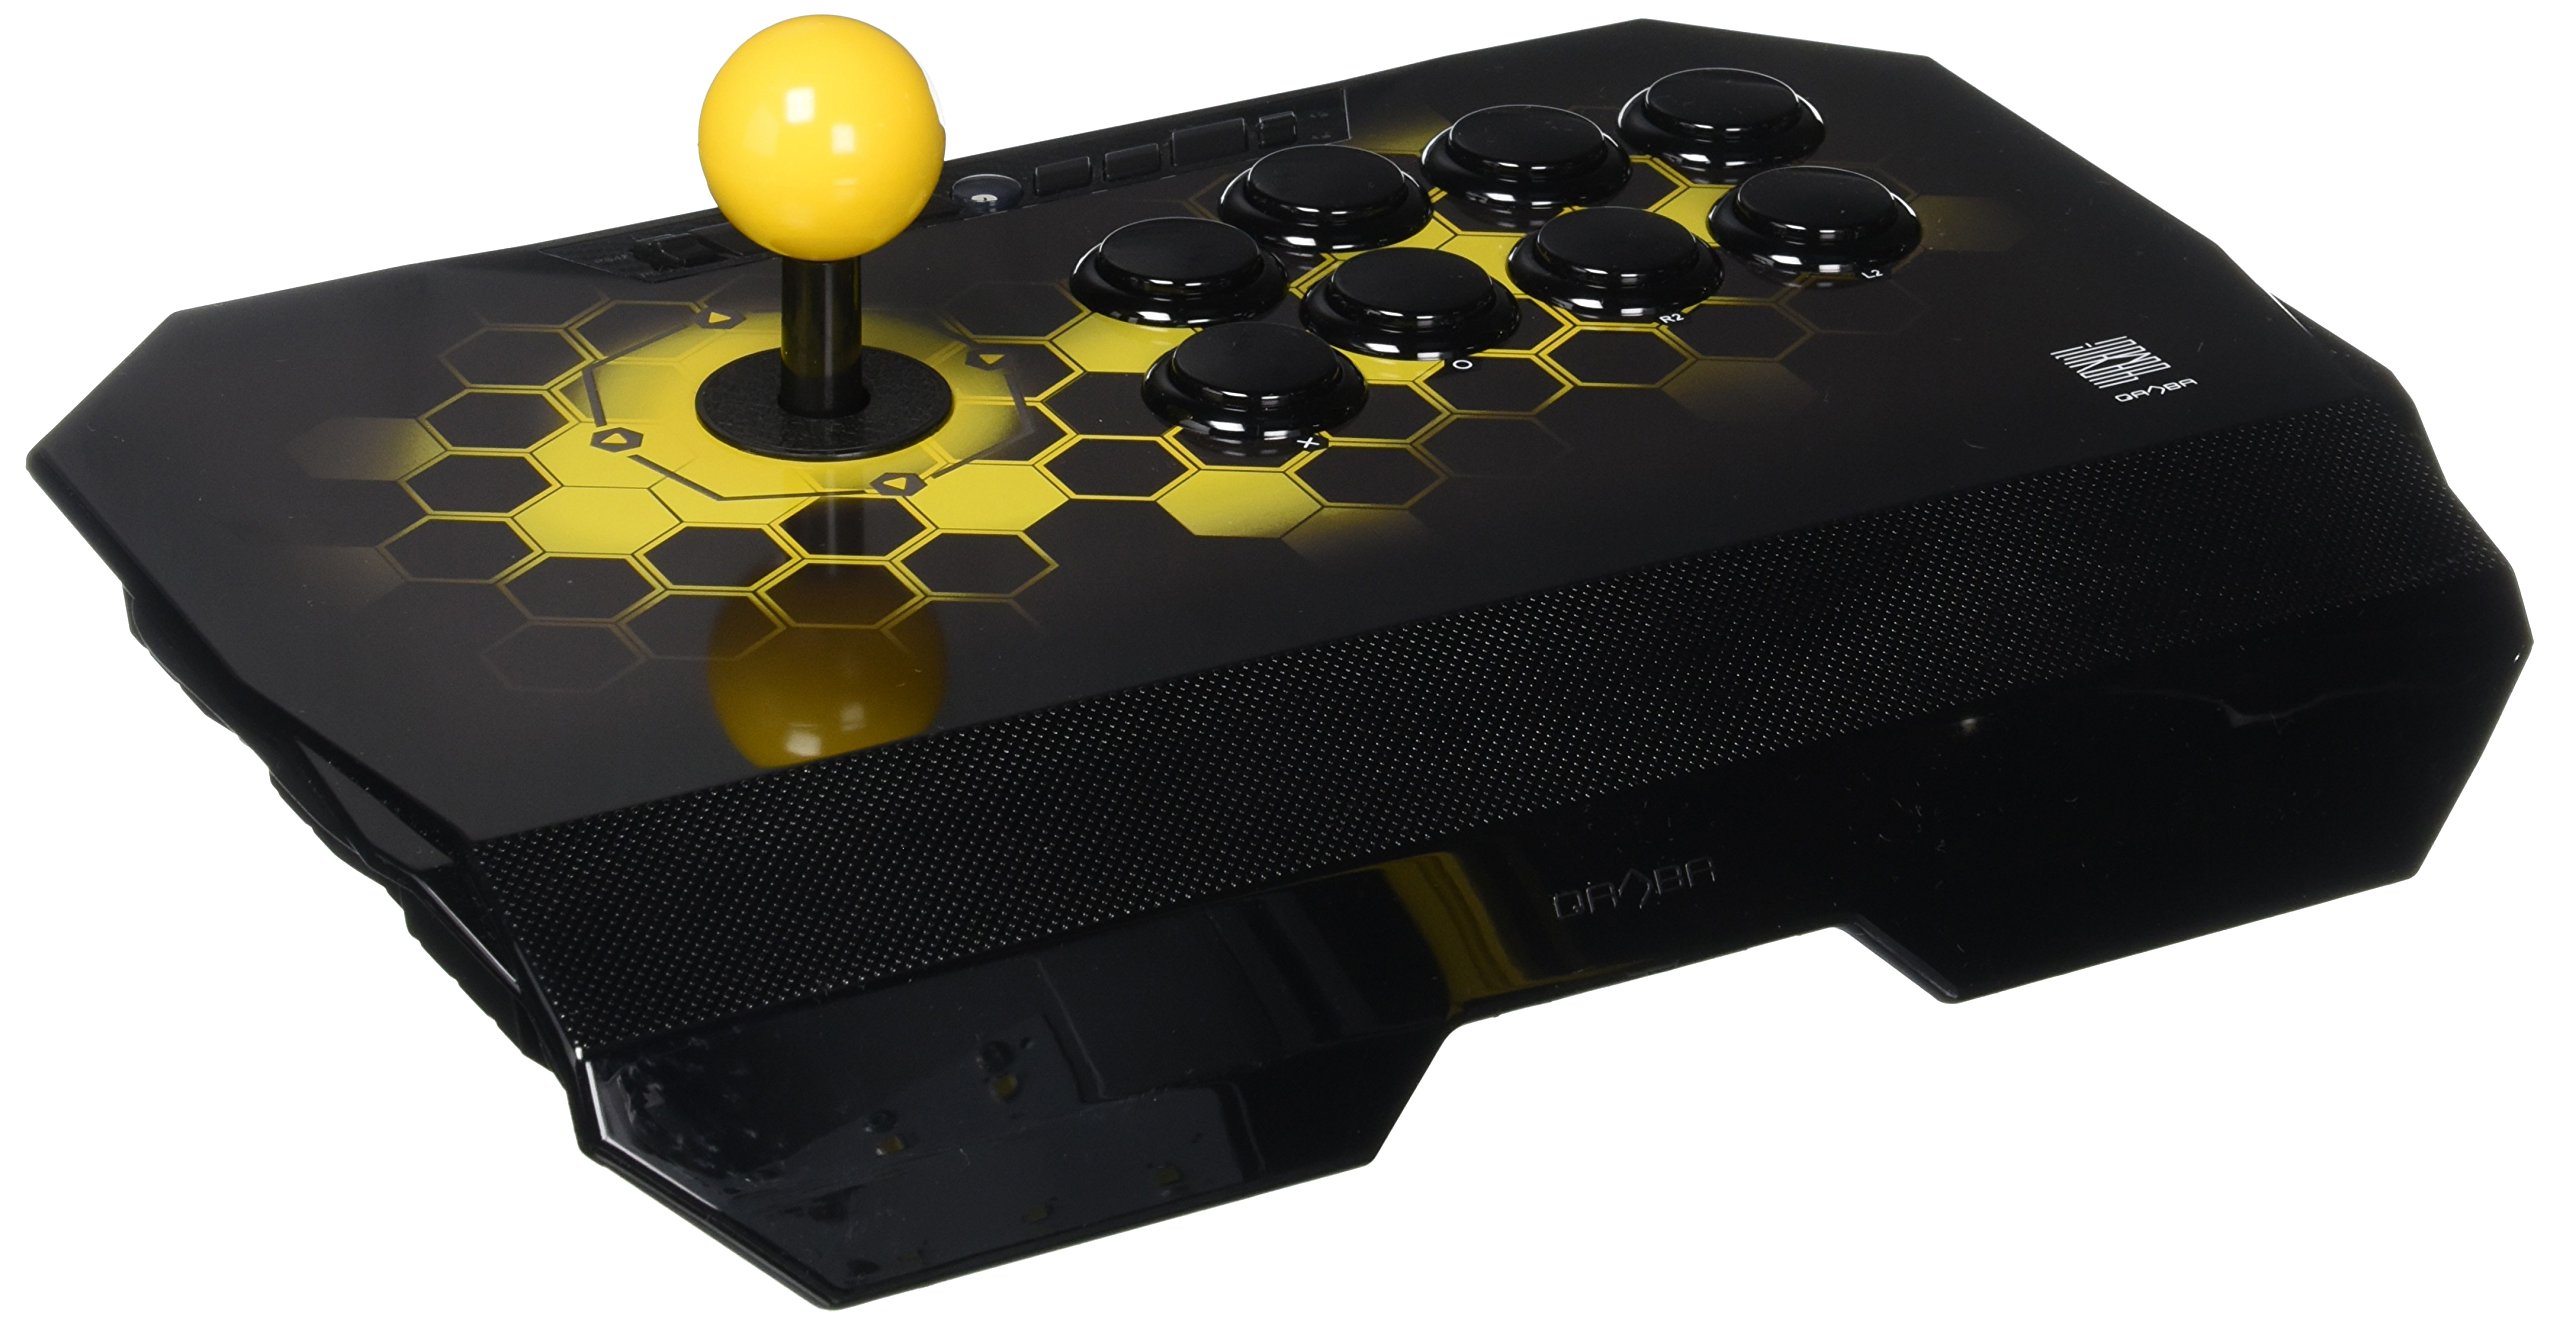 Book Cover Qanba Drone Joystick for PlayStation 4 and PlayStation 3 and PC (Fighting Stick) Officially Licensed Sony Product